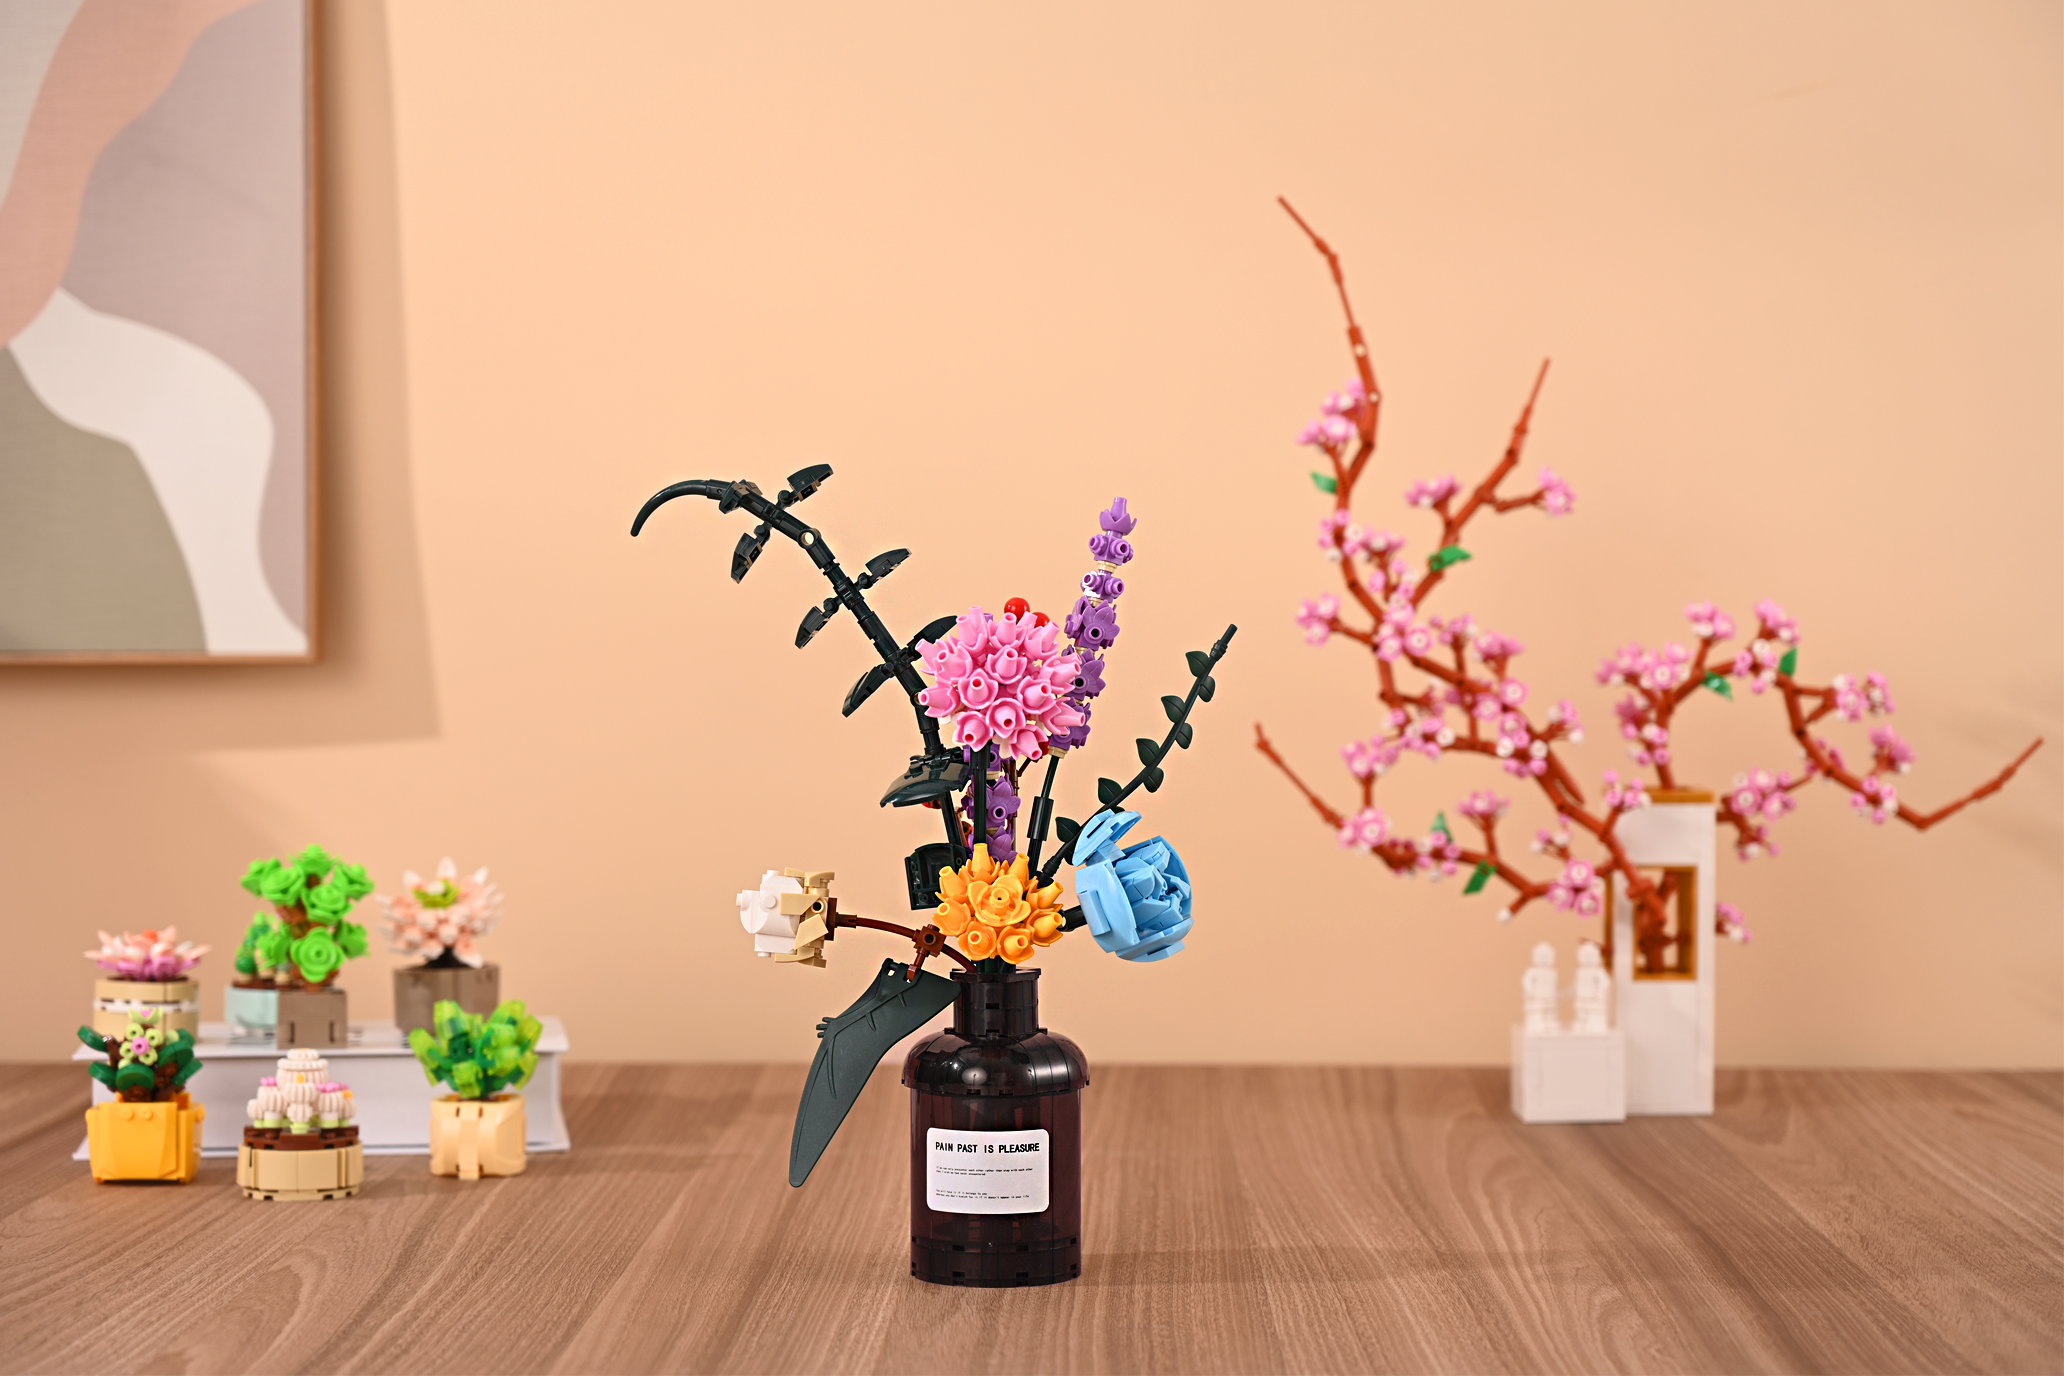 3D printed this vase for my flower bouquet : r/lego